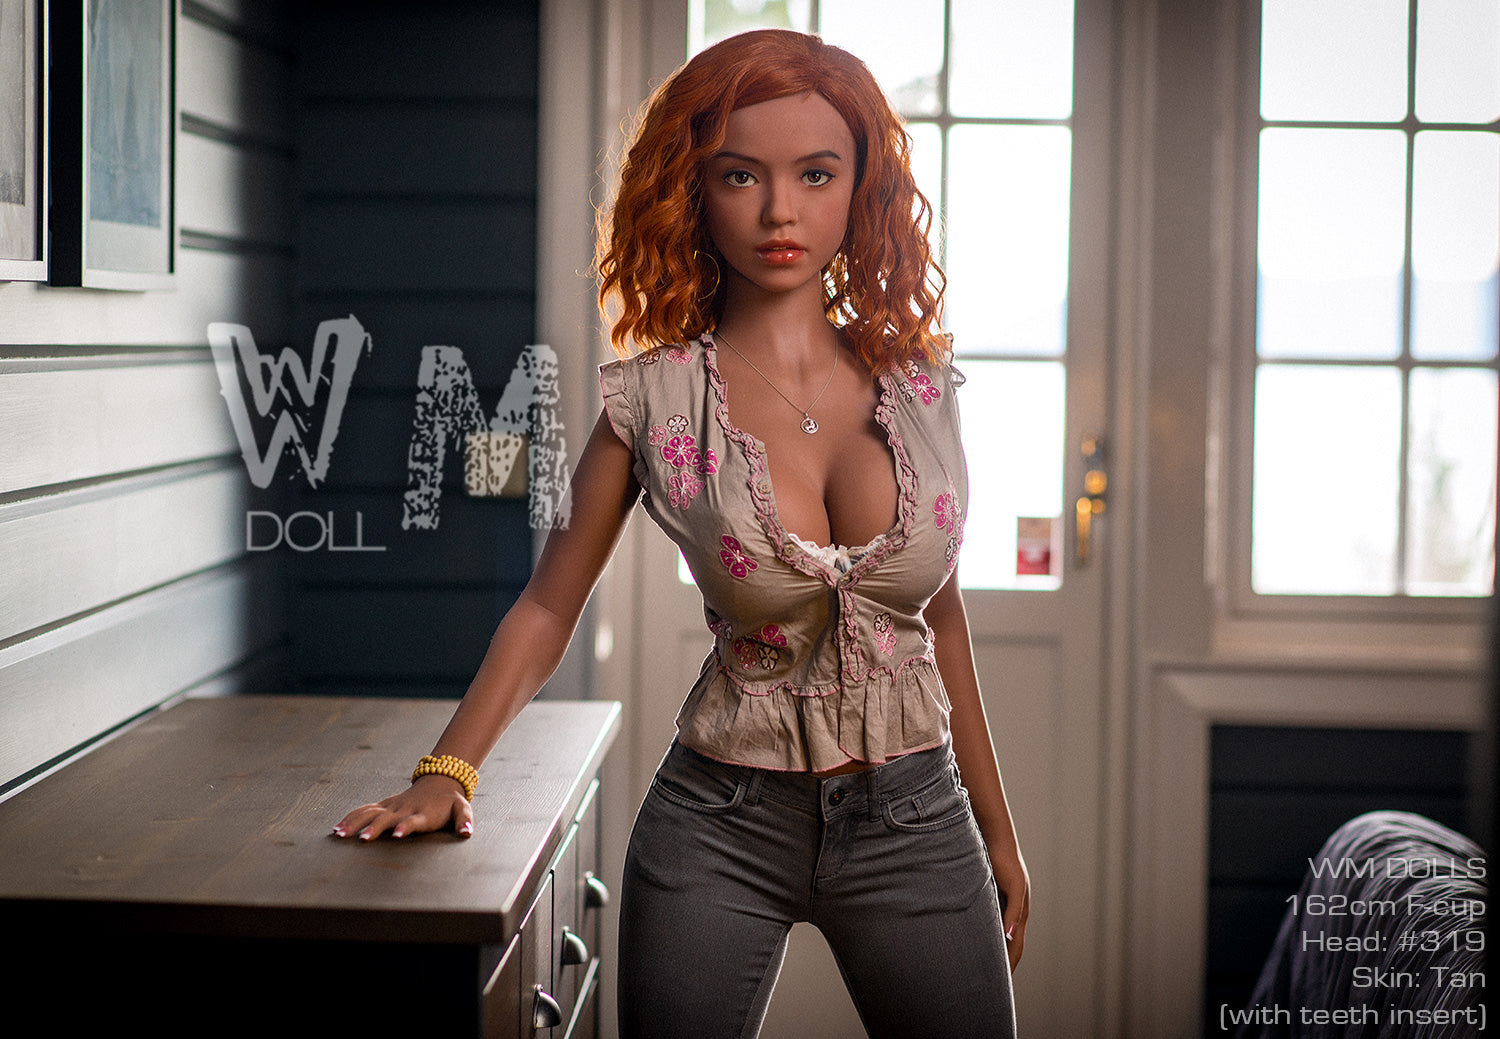 WM DOLL 162 CM F TPE - Everly | Buy Sex Dolls at DOLLS ACTUALLY